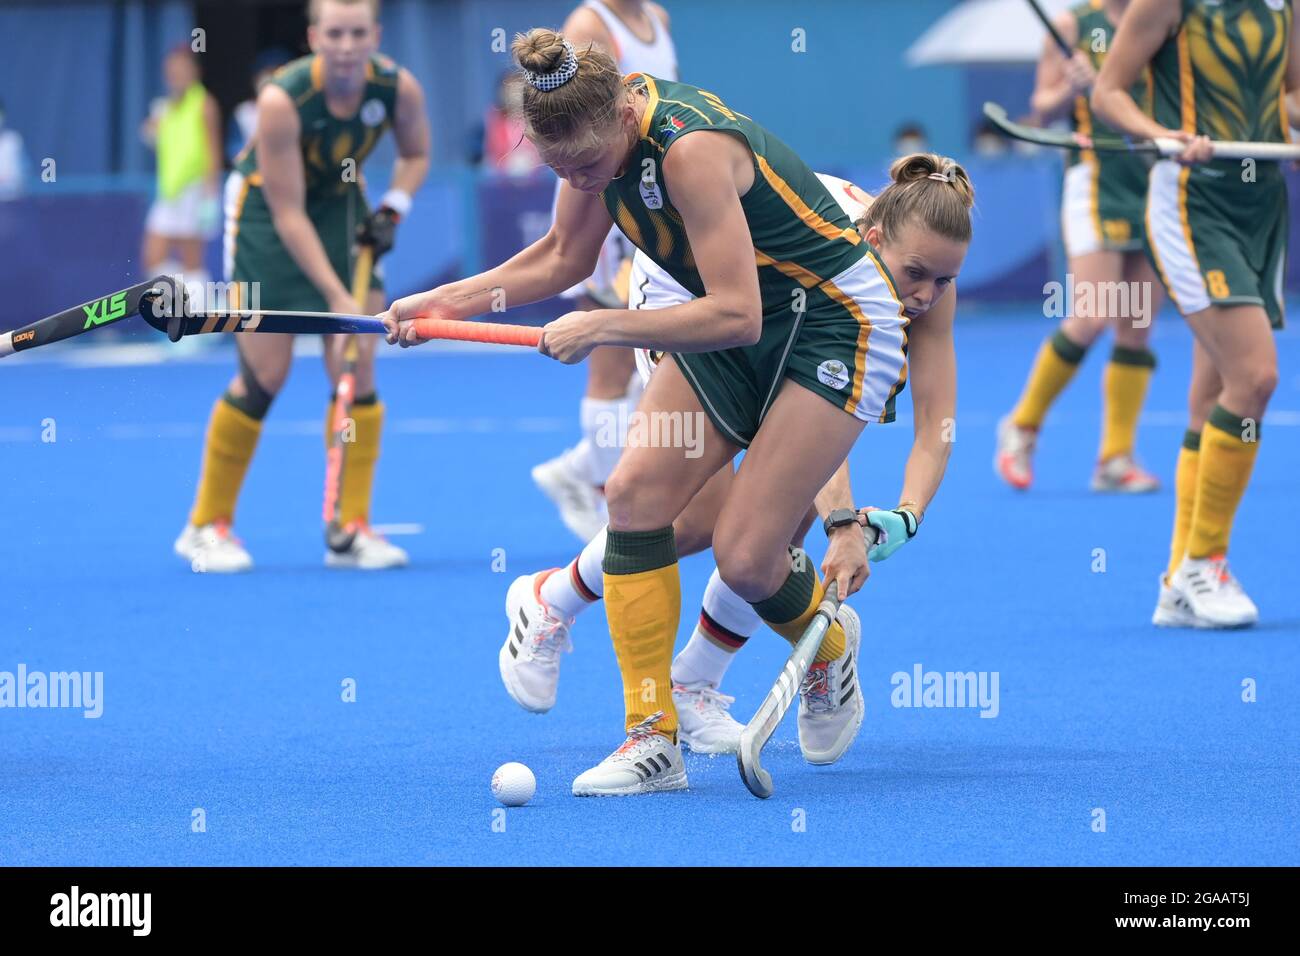 Tokyo, Japan. 30th July, 2021. Hockey, Women: Olympics, South Africa -  Germany, Preliminary Round, Group A, Matchday 4 at Oi Hockey Stadium. Nike  Lorenz (back) of Germany and Marizen Marais of South